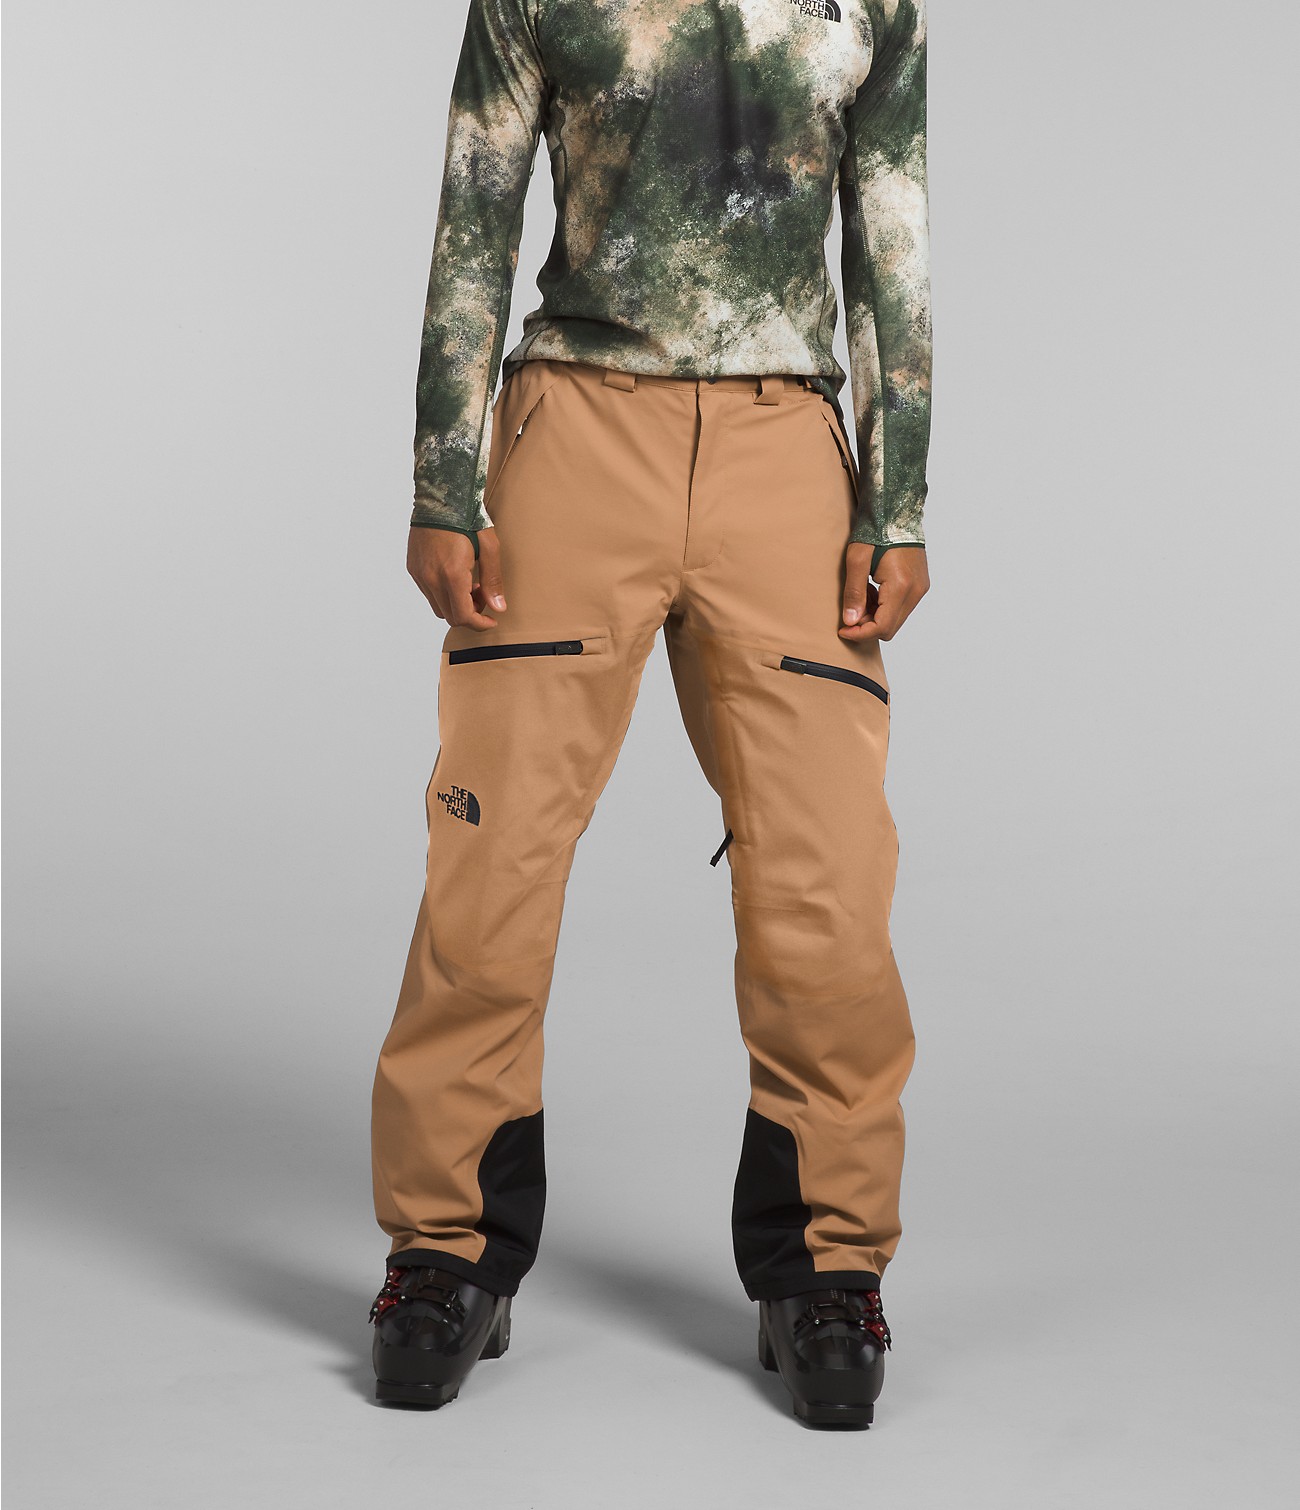 Unlock Wilderness' choice in the Burton Vs North Face comparison, the Chakal Pants by The North Face